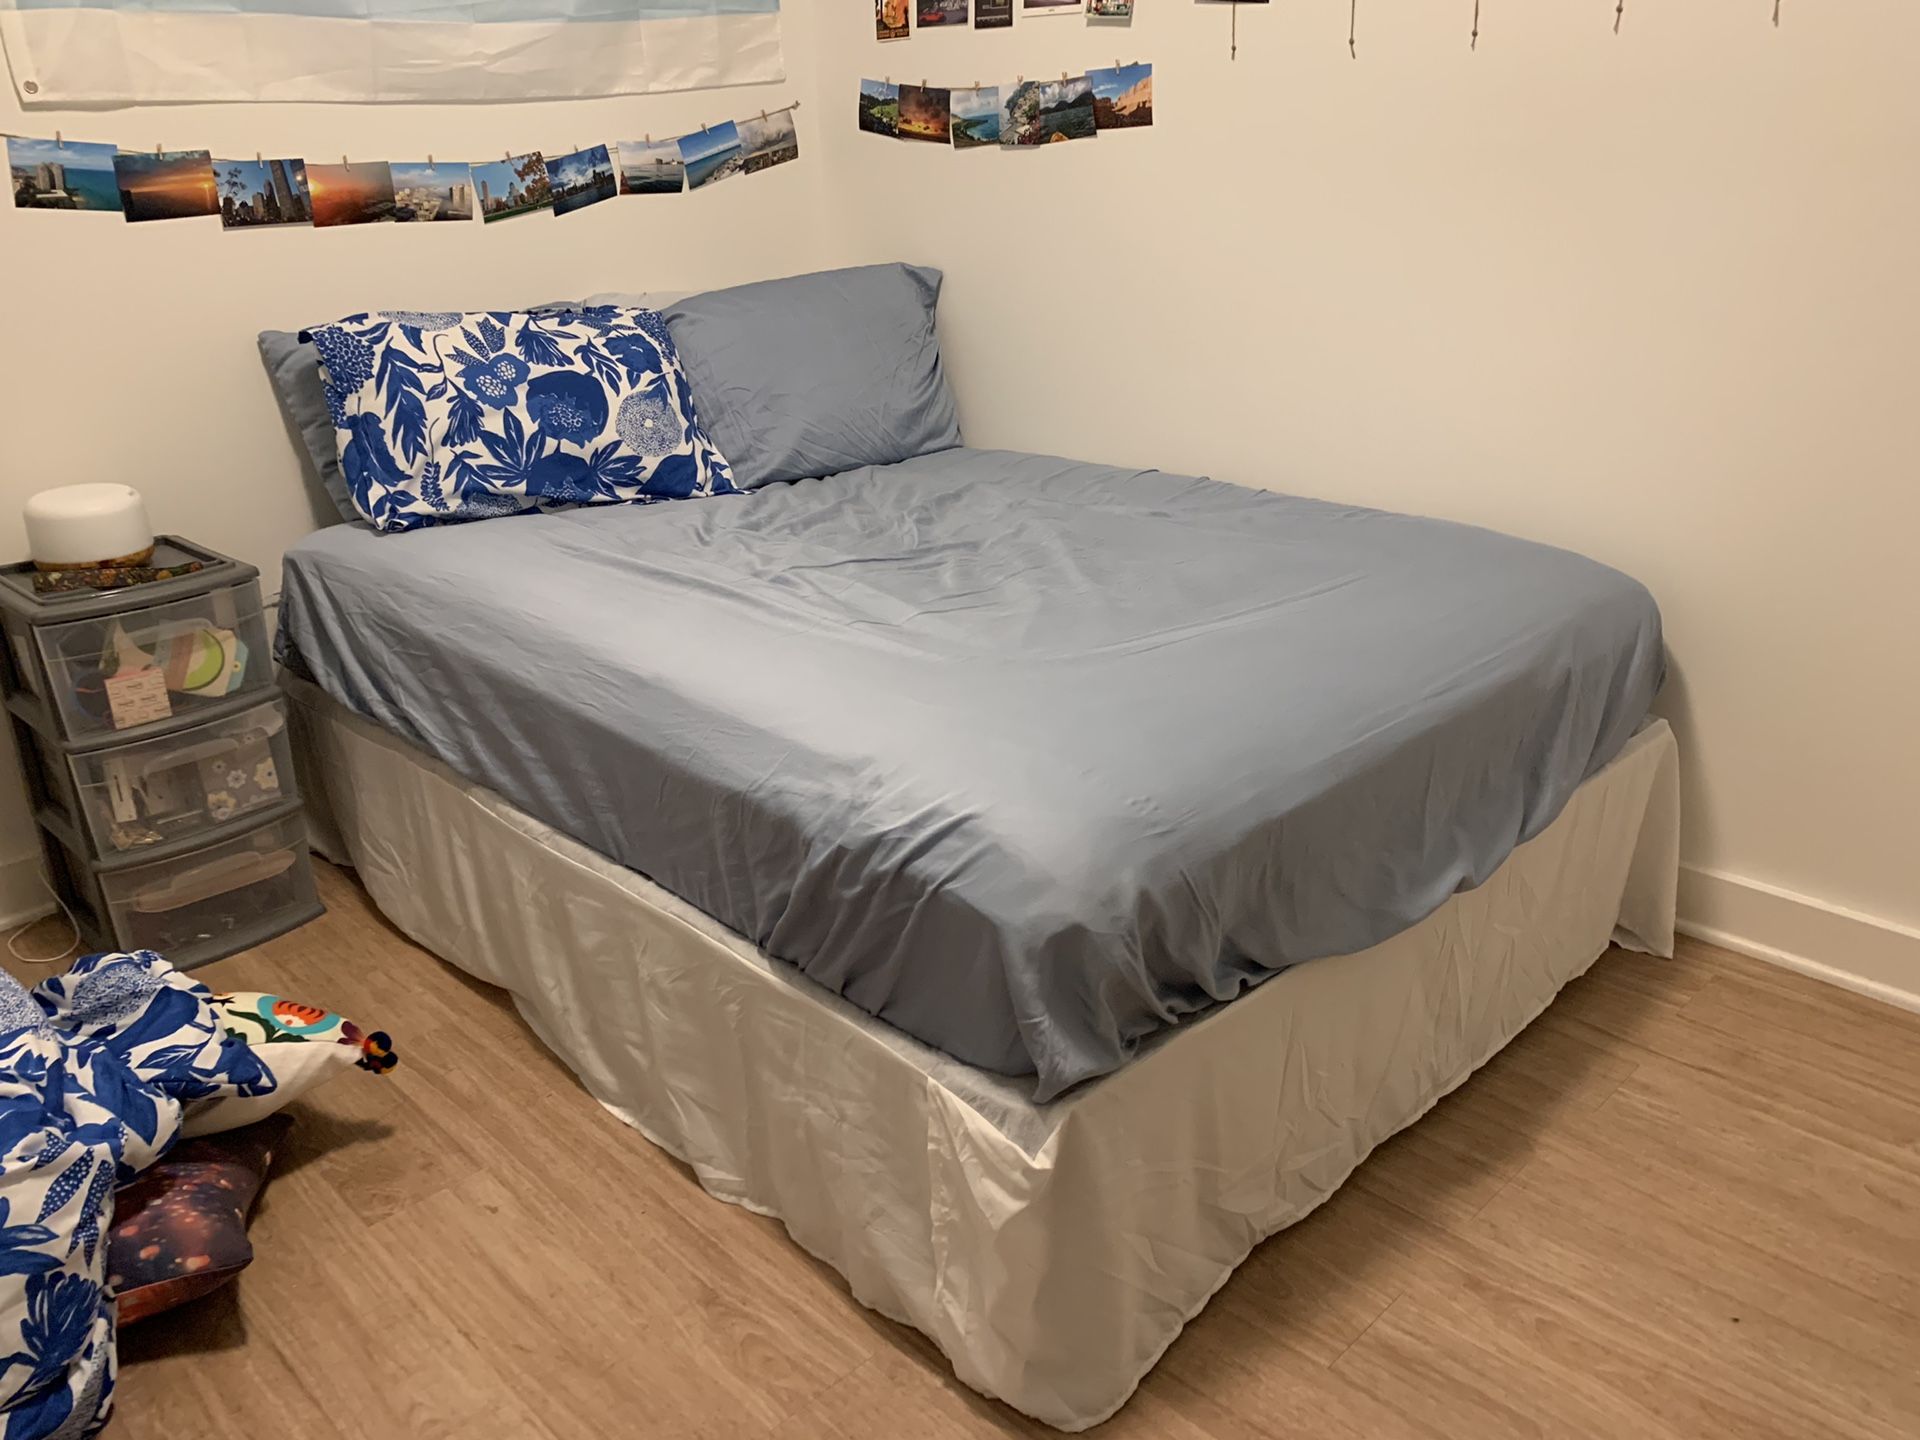 Full sized bed frame and mattress